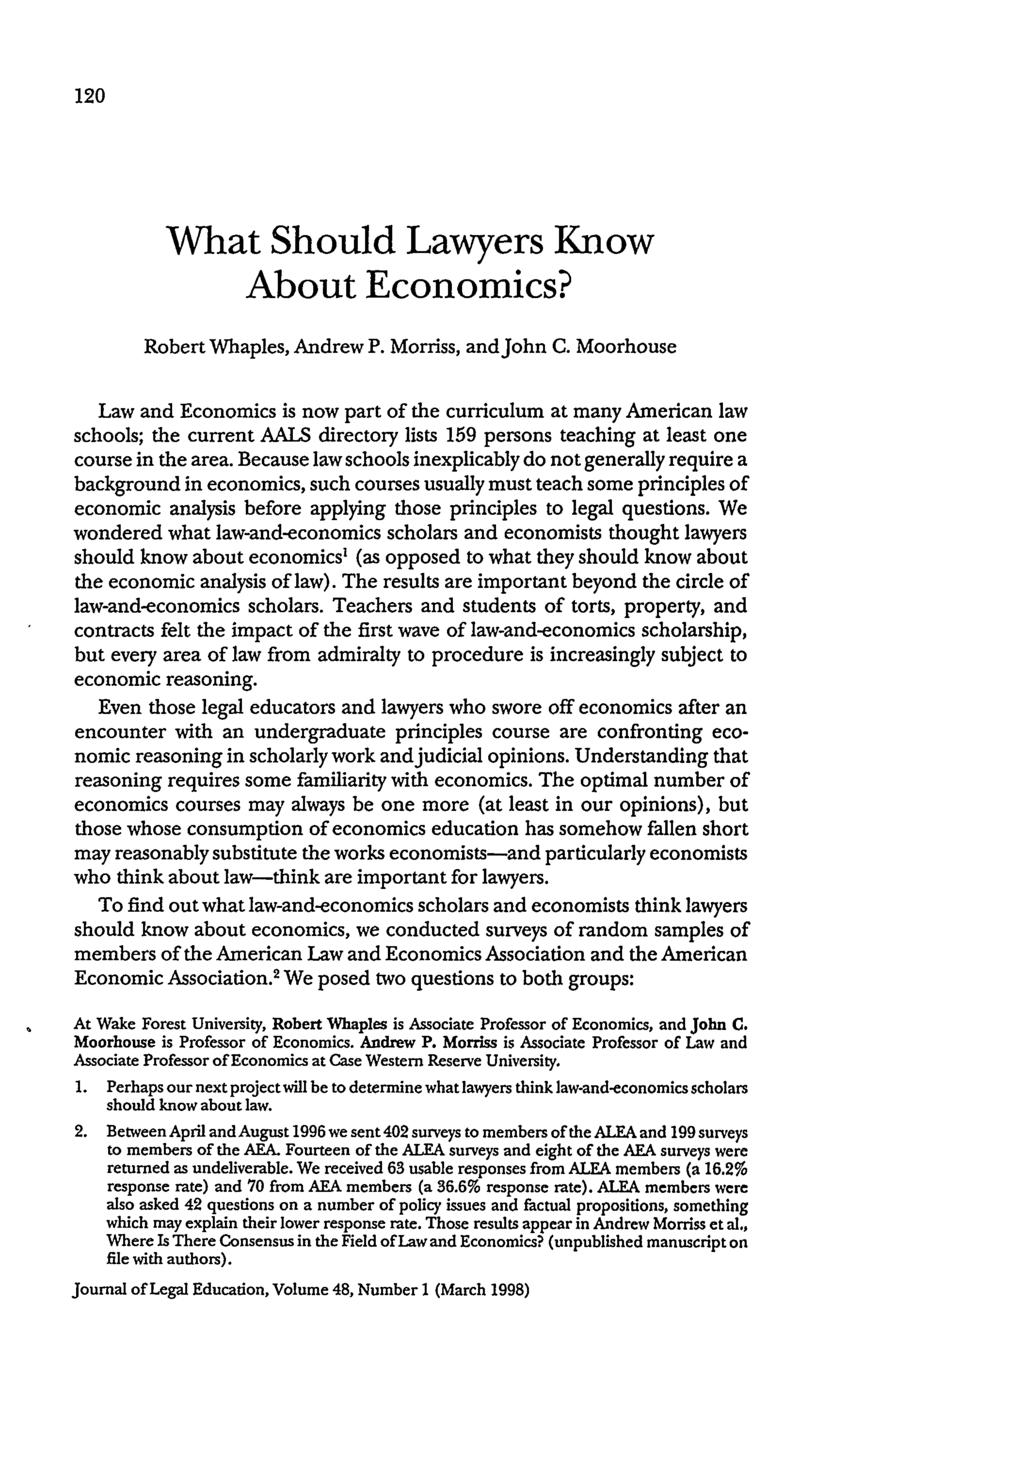 What Should Lawyers Know About Economics? Robert Whaples, Andrew P. Morriss, and John C.